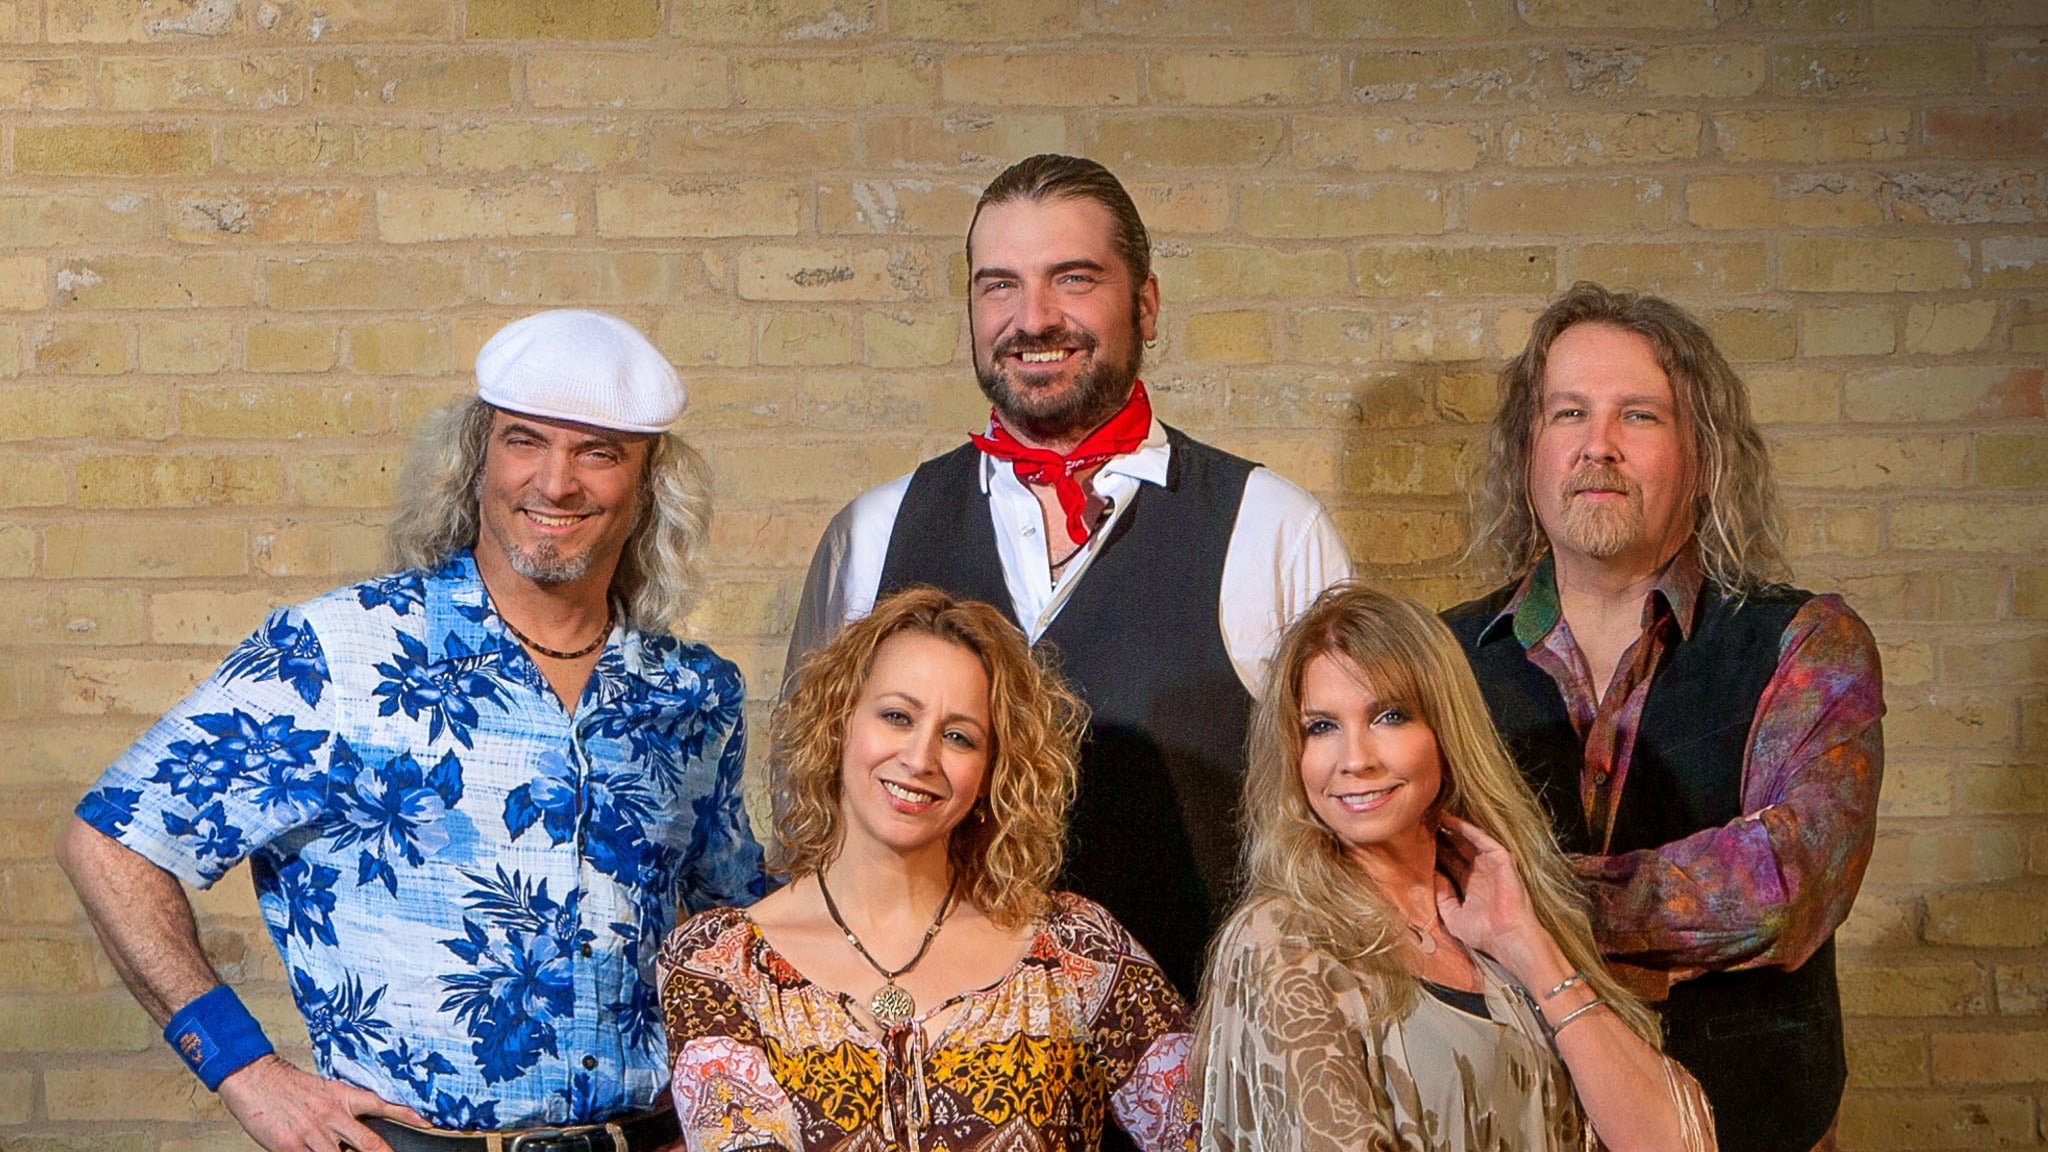 TUSK - Fleetwood Mac Tribute in Hagerstown promo photo for Exclusive presale offer code